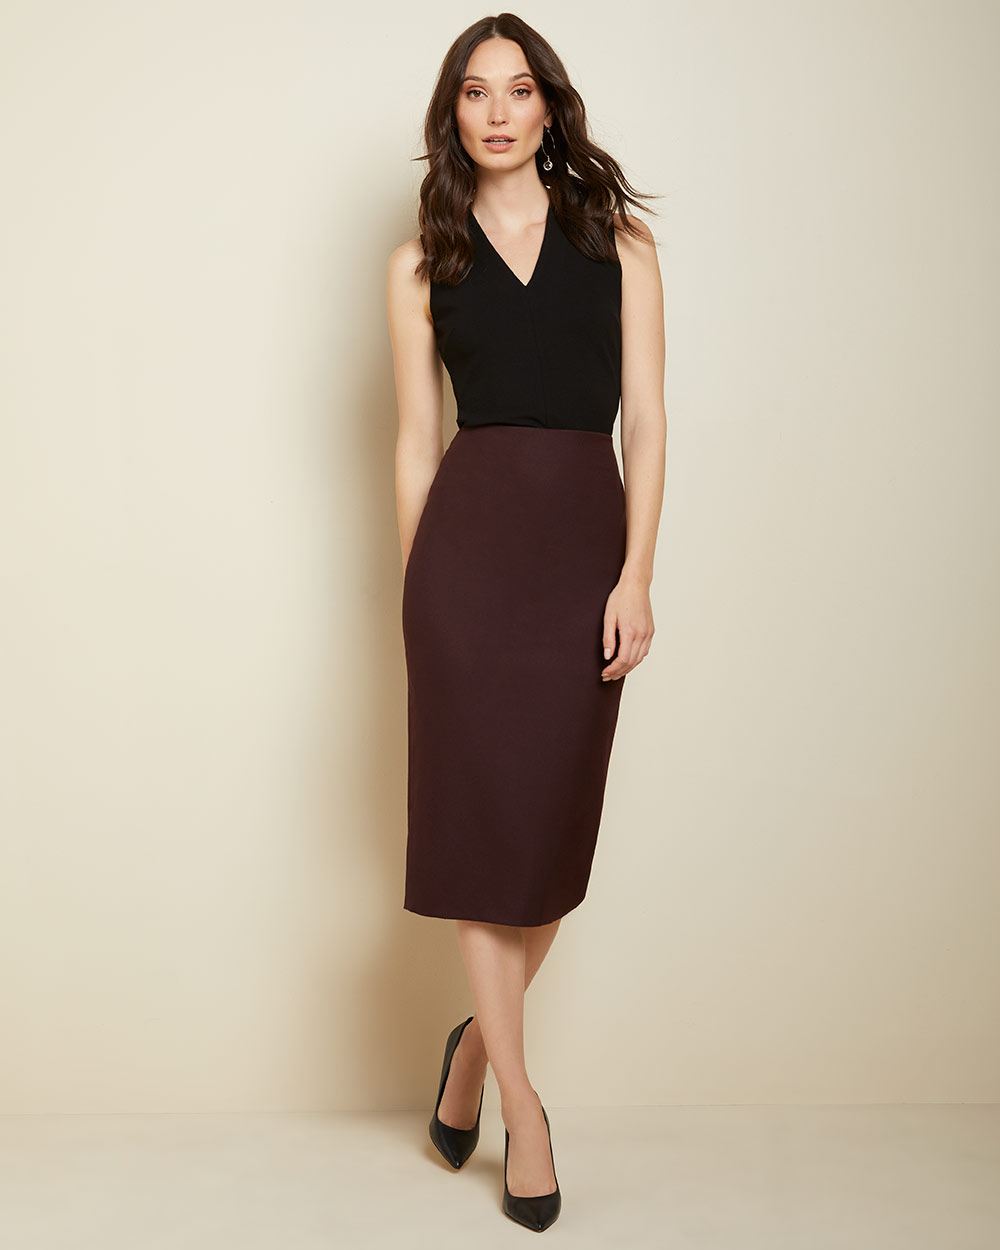 Flannel High-waist pencil skirt with back buttons | RW&CO.